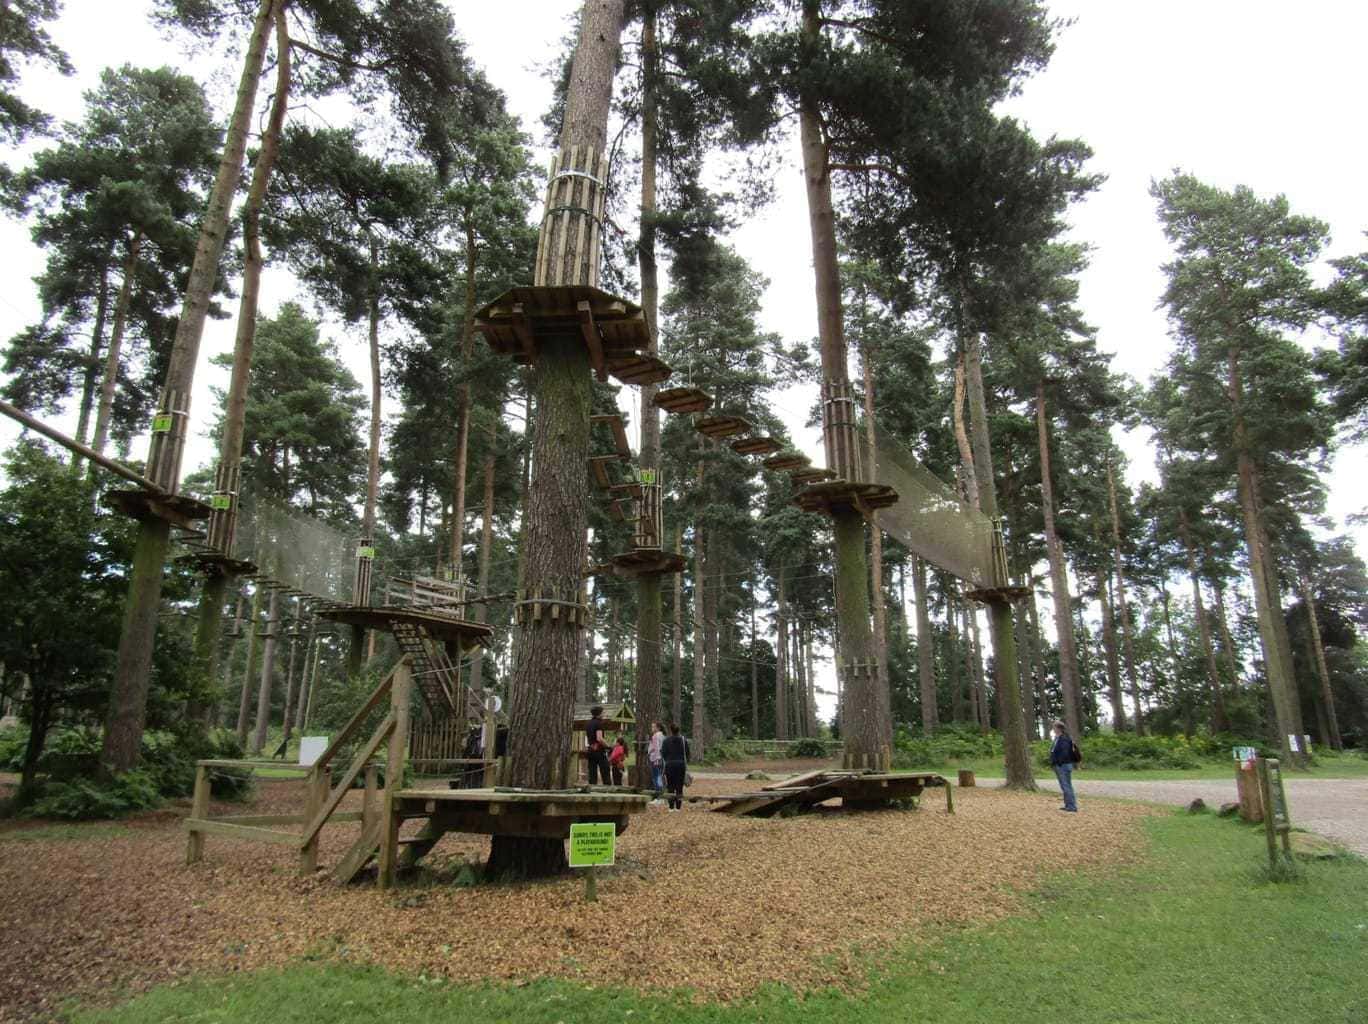 Go Ape Tree Top - Junior Course Reviewed www.minitravellers.co.uk